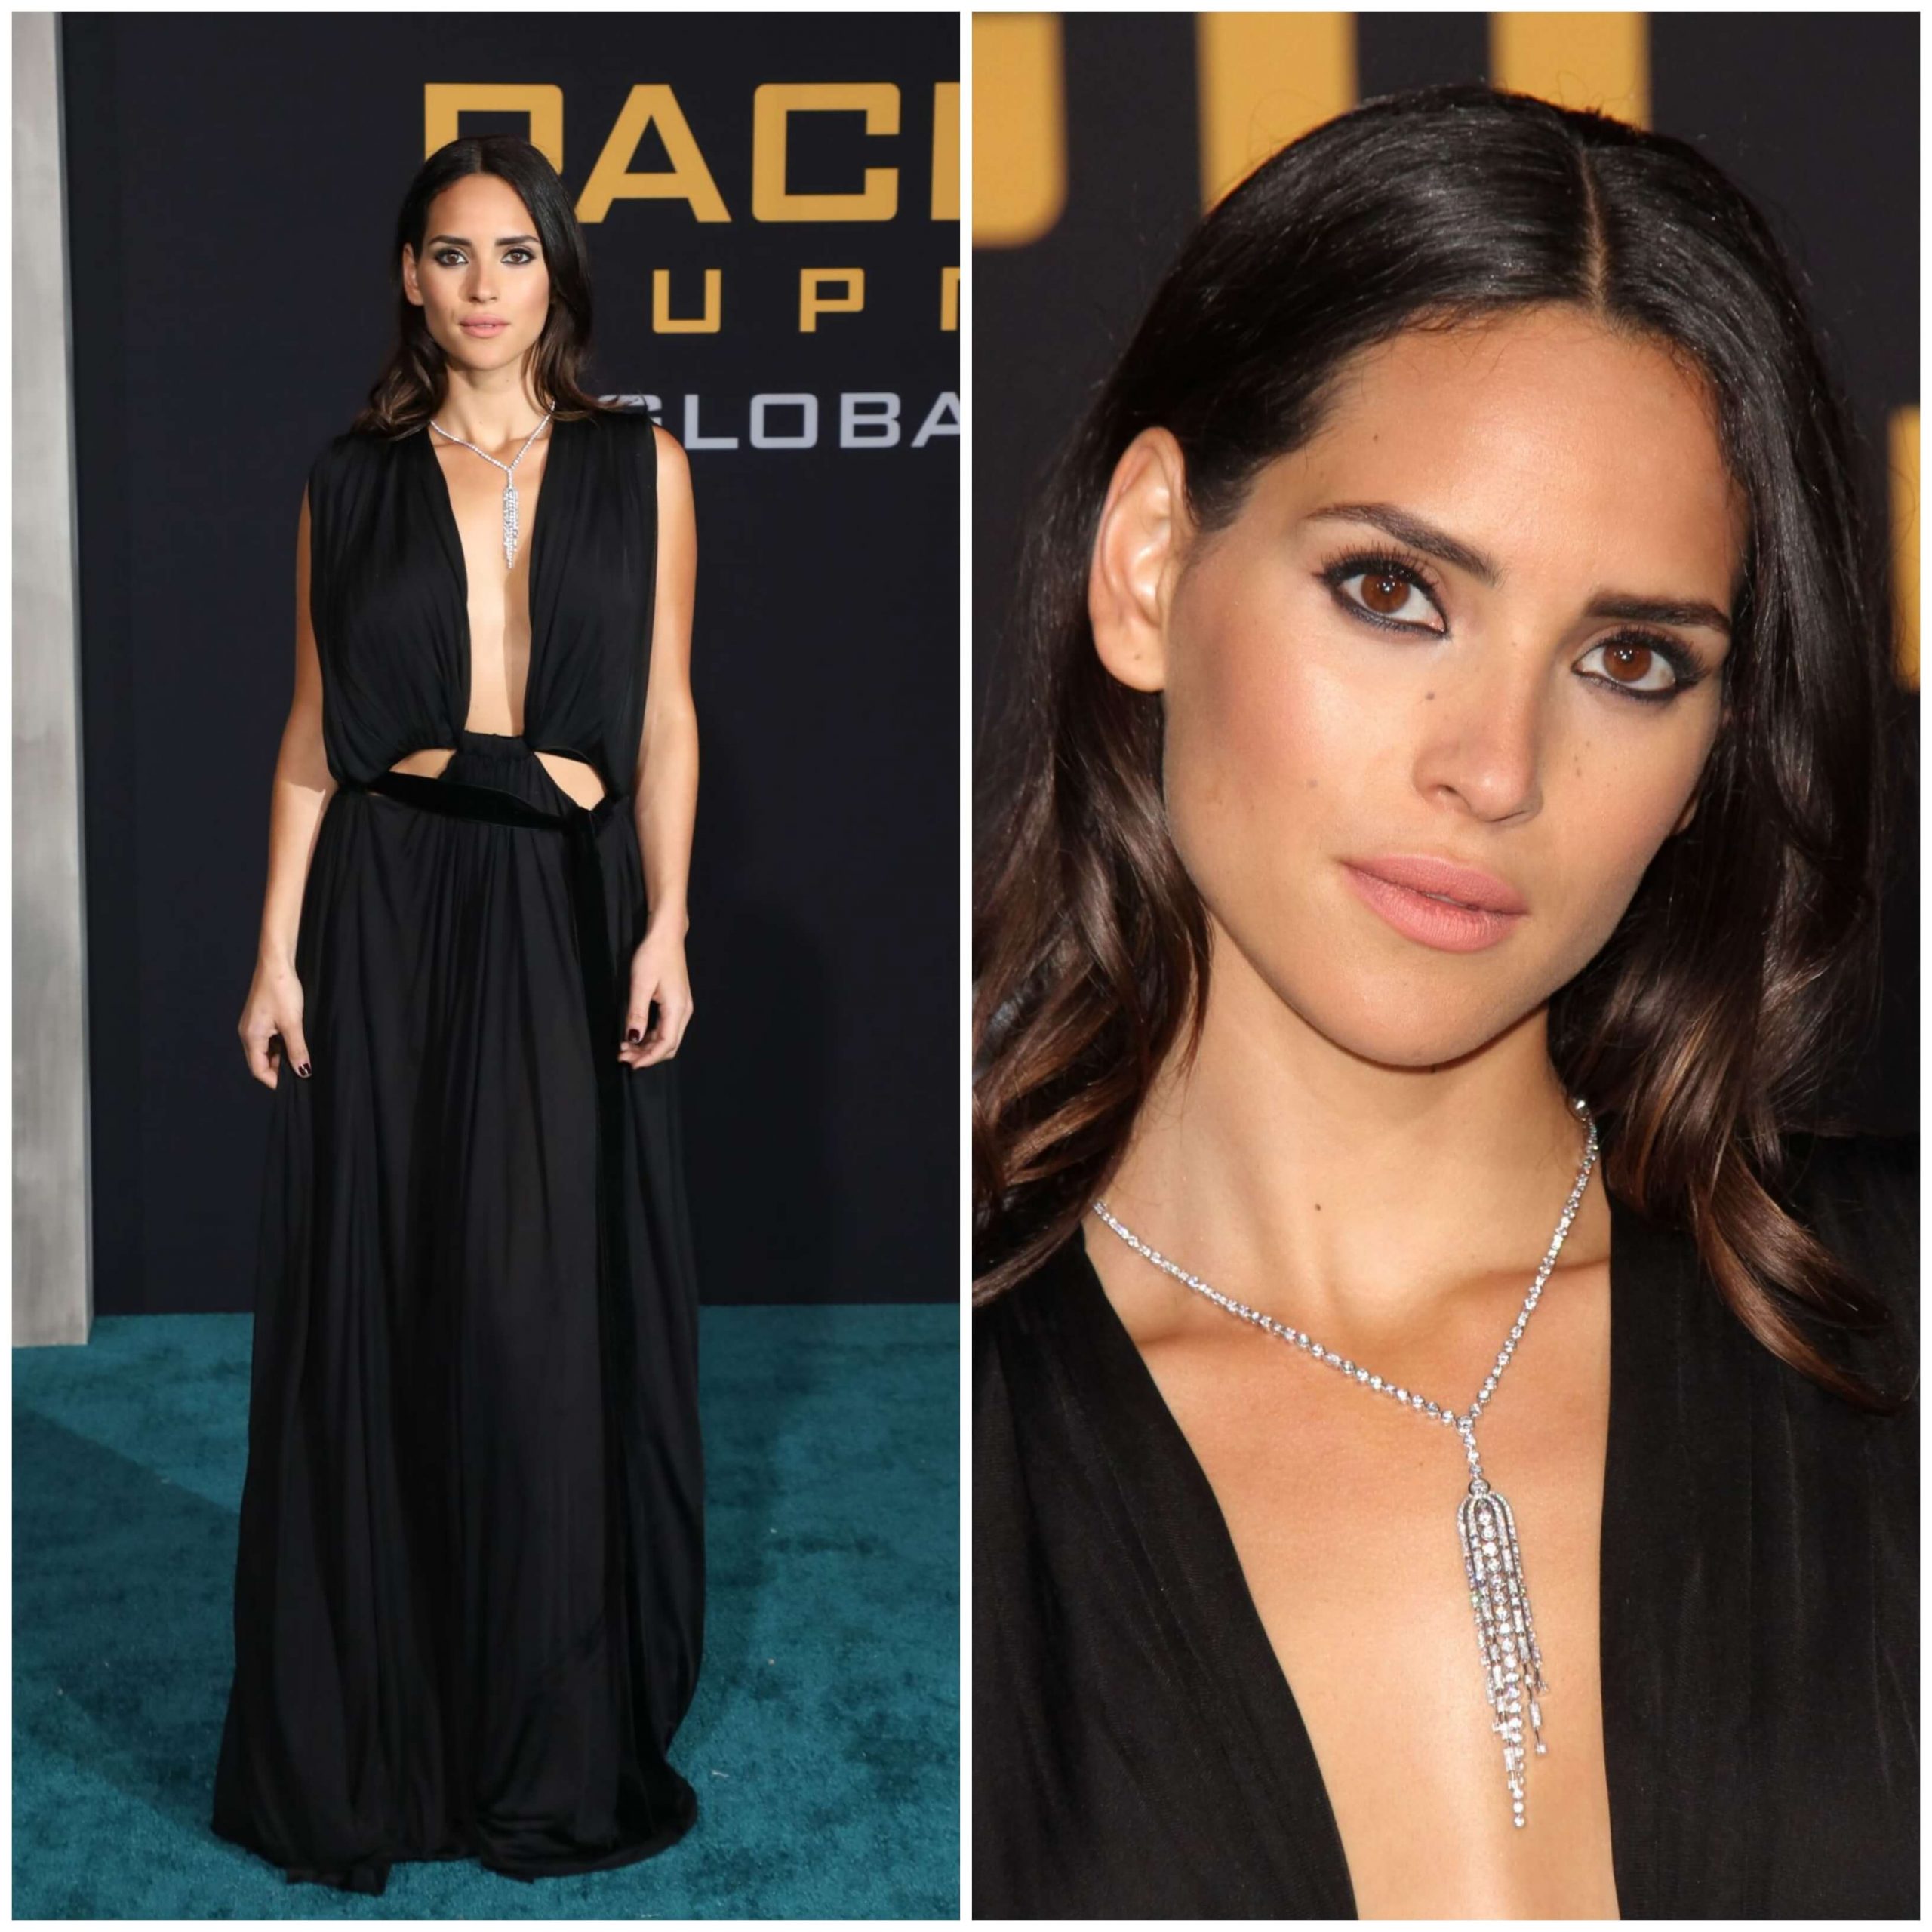 Adria Arjona Stunning Look In Black Asymmetric Cut-Out Dress With Silver Pearls Necklace